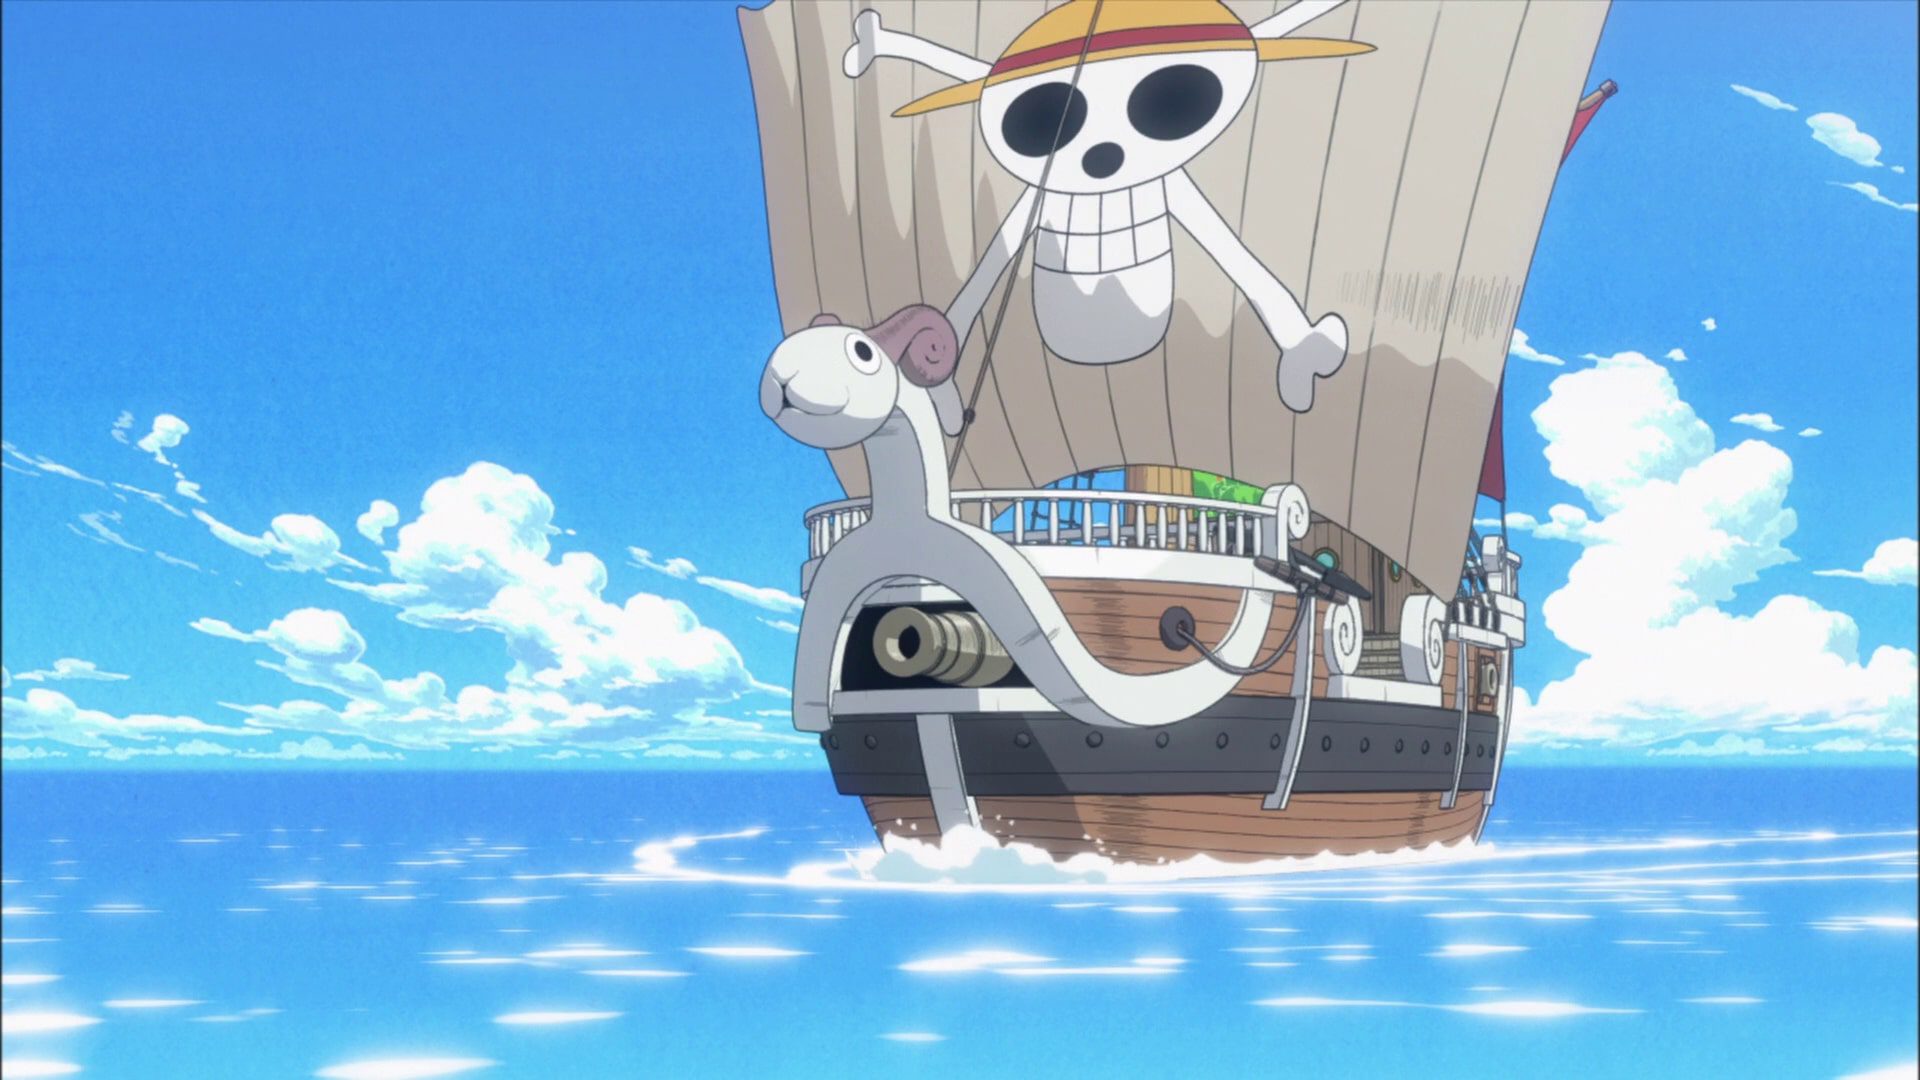 Will Going Merry die in One Piece?